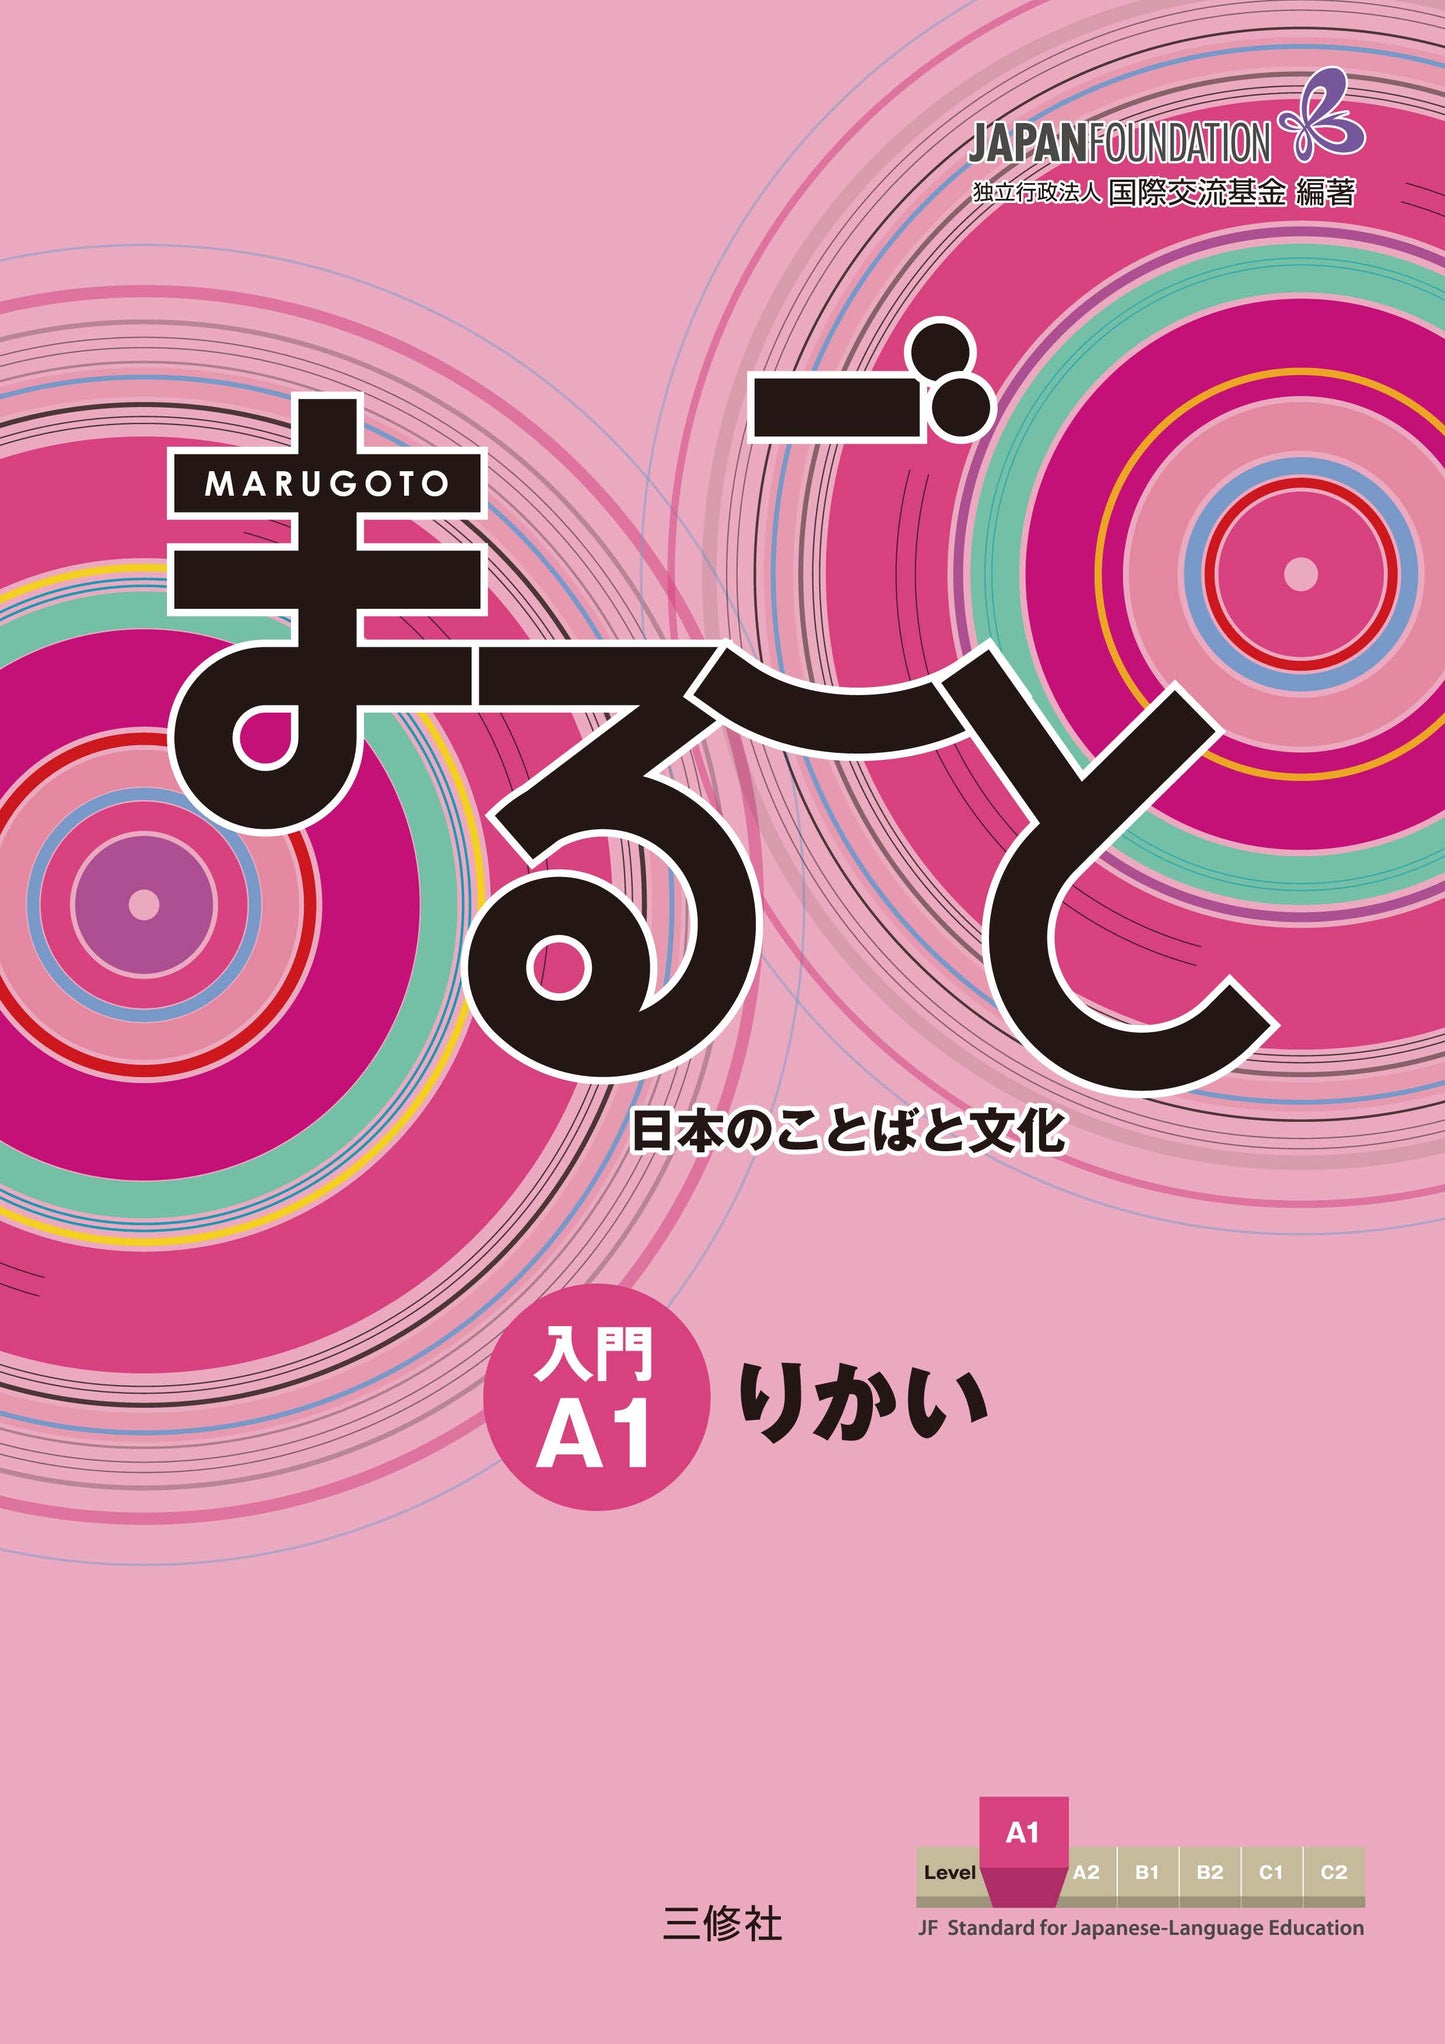 Marugoto: Japanese language and culture Starter A1 Coursebook for communicative language competences